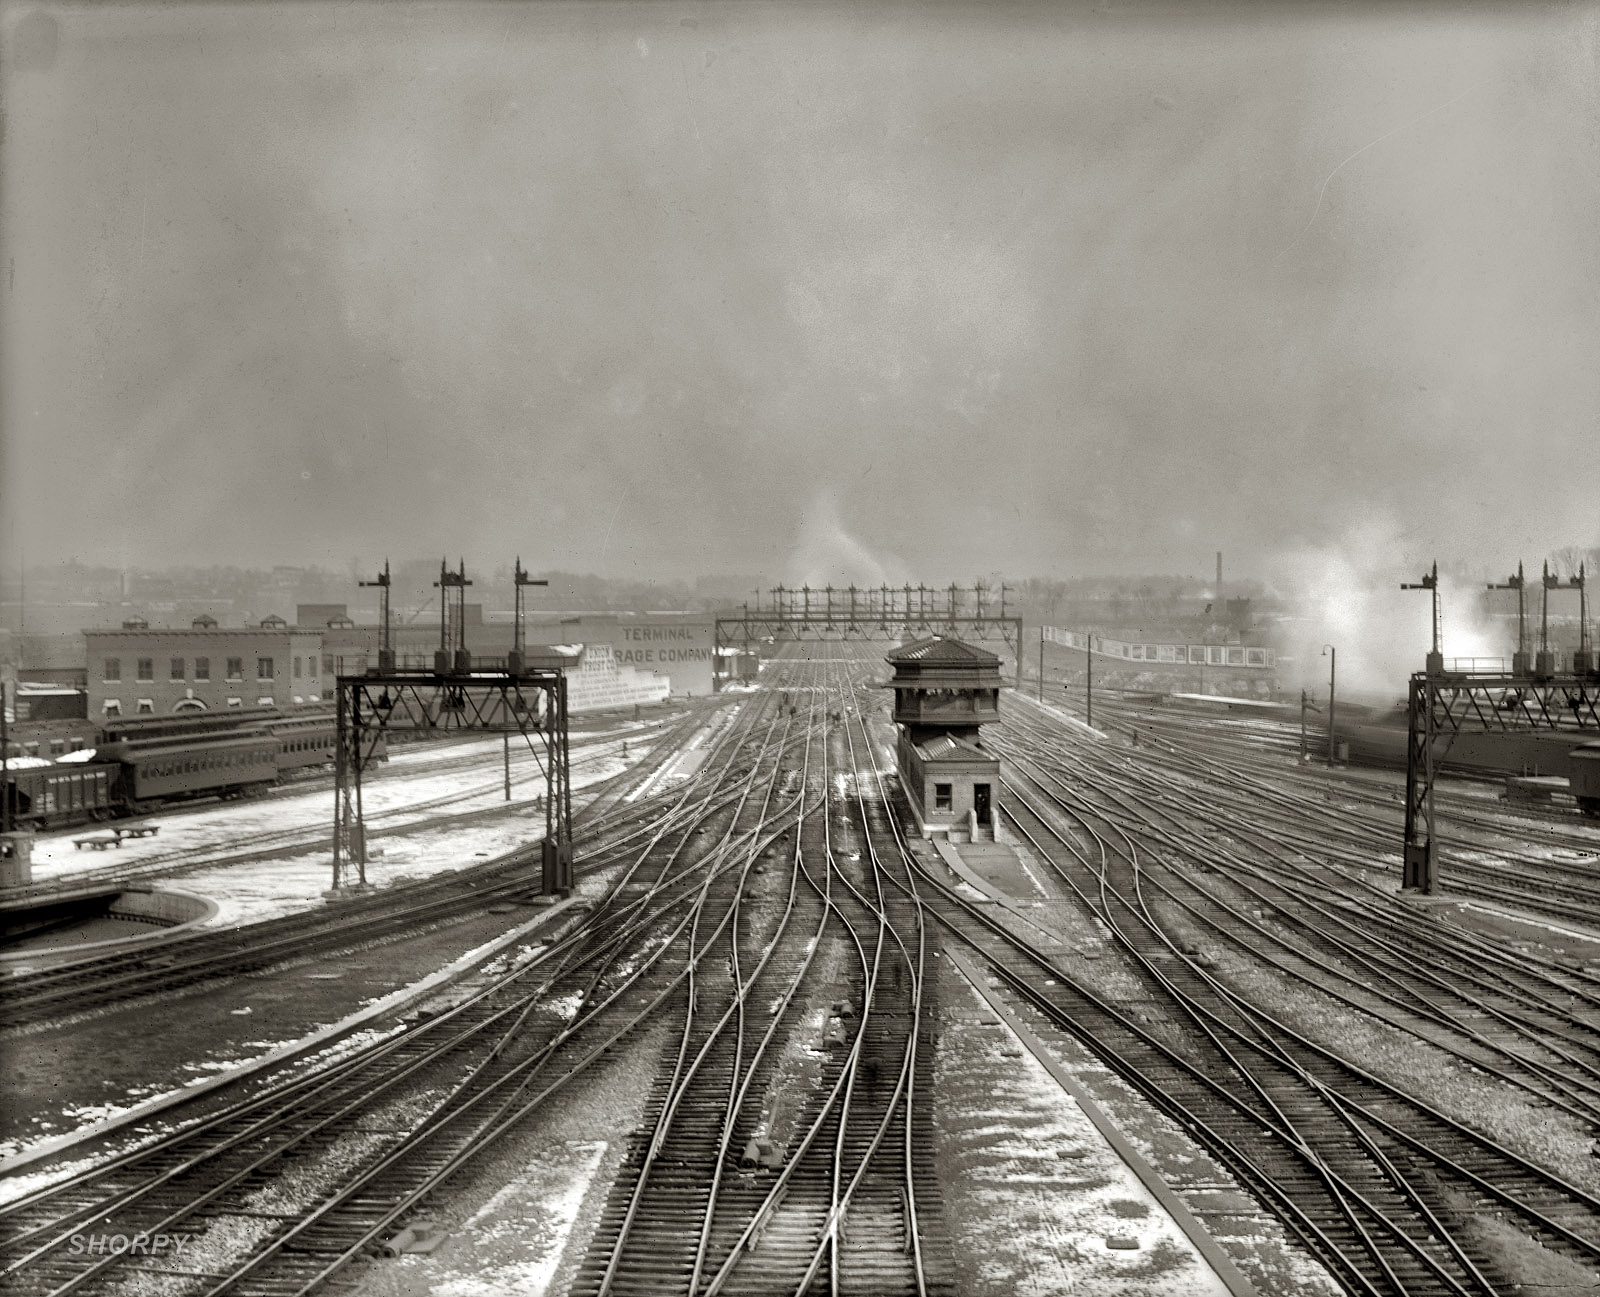 Workers on the tracks at Union Station in Washington on a winter day circa 1920. View full size. National Photo Company Collection glass negative.